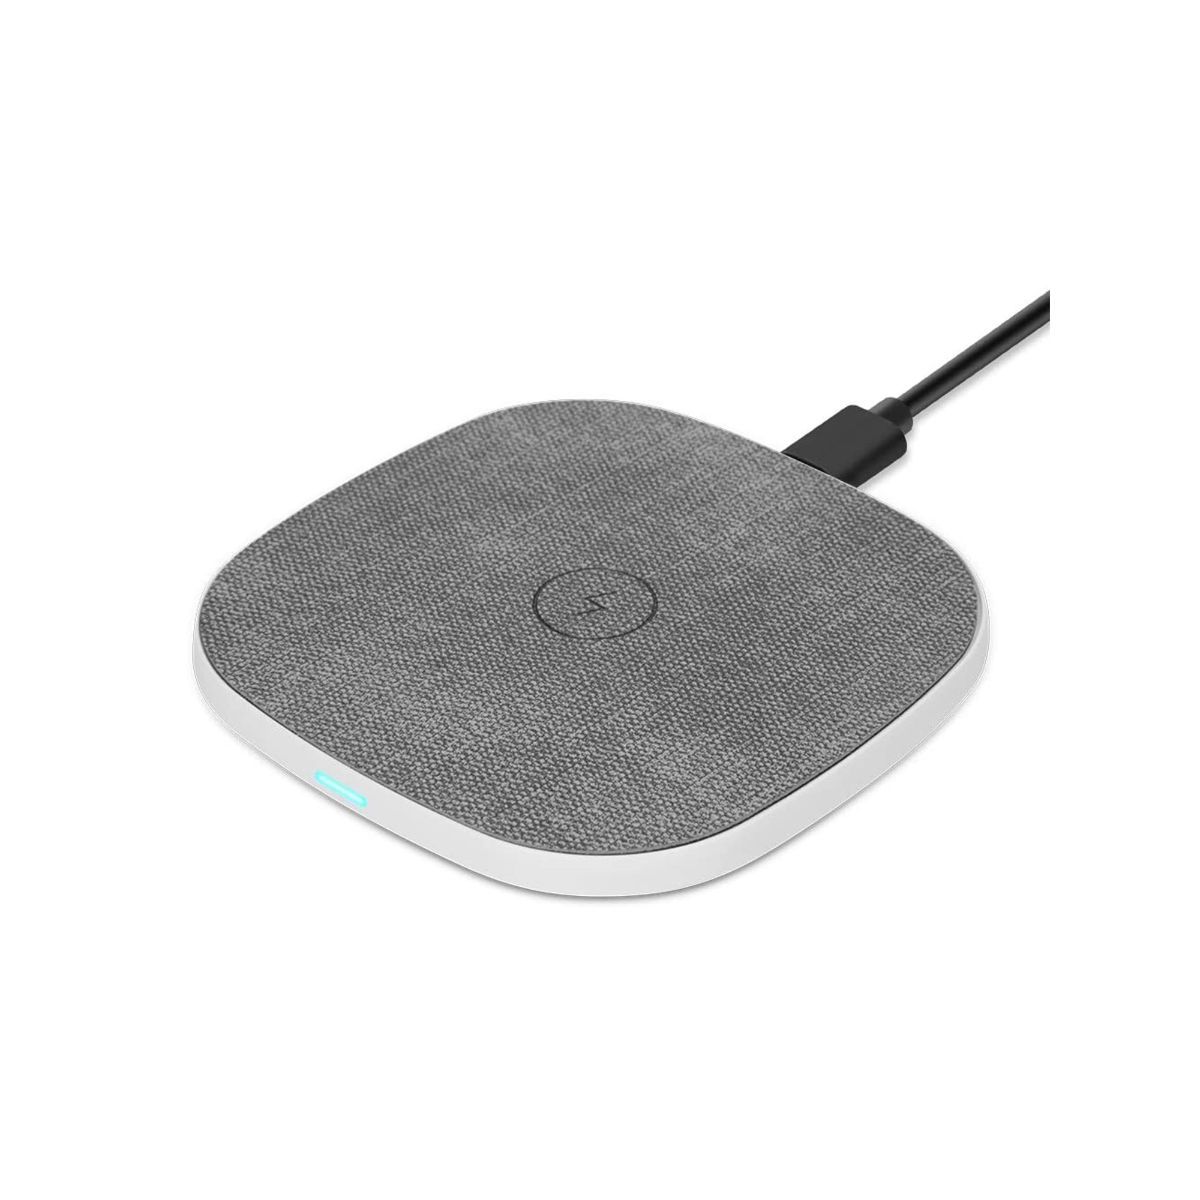 UNIGEN AUDIO UNIPAD 15W Fast Wireless Charger Pad For iPhone, Samsung ans Qi-enabled Devices